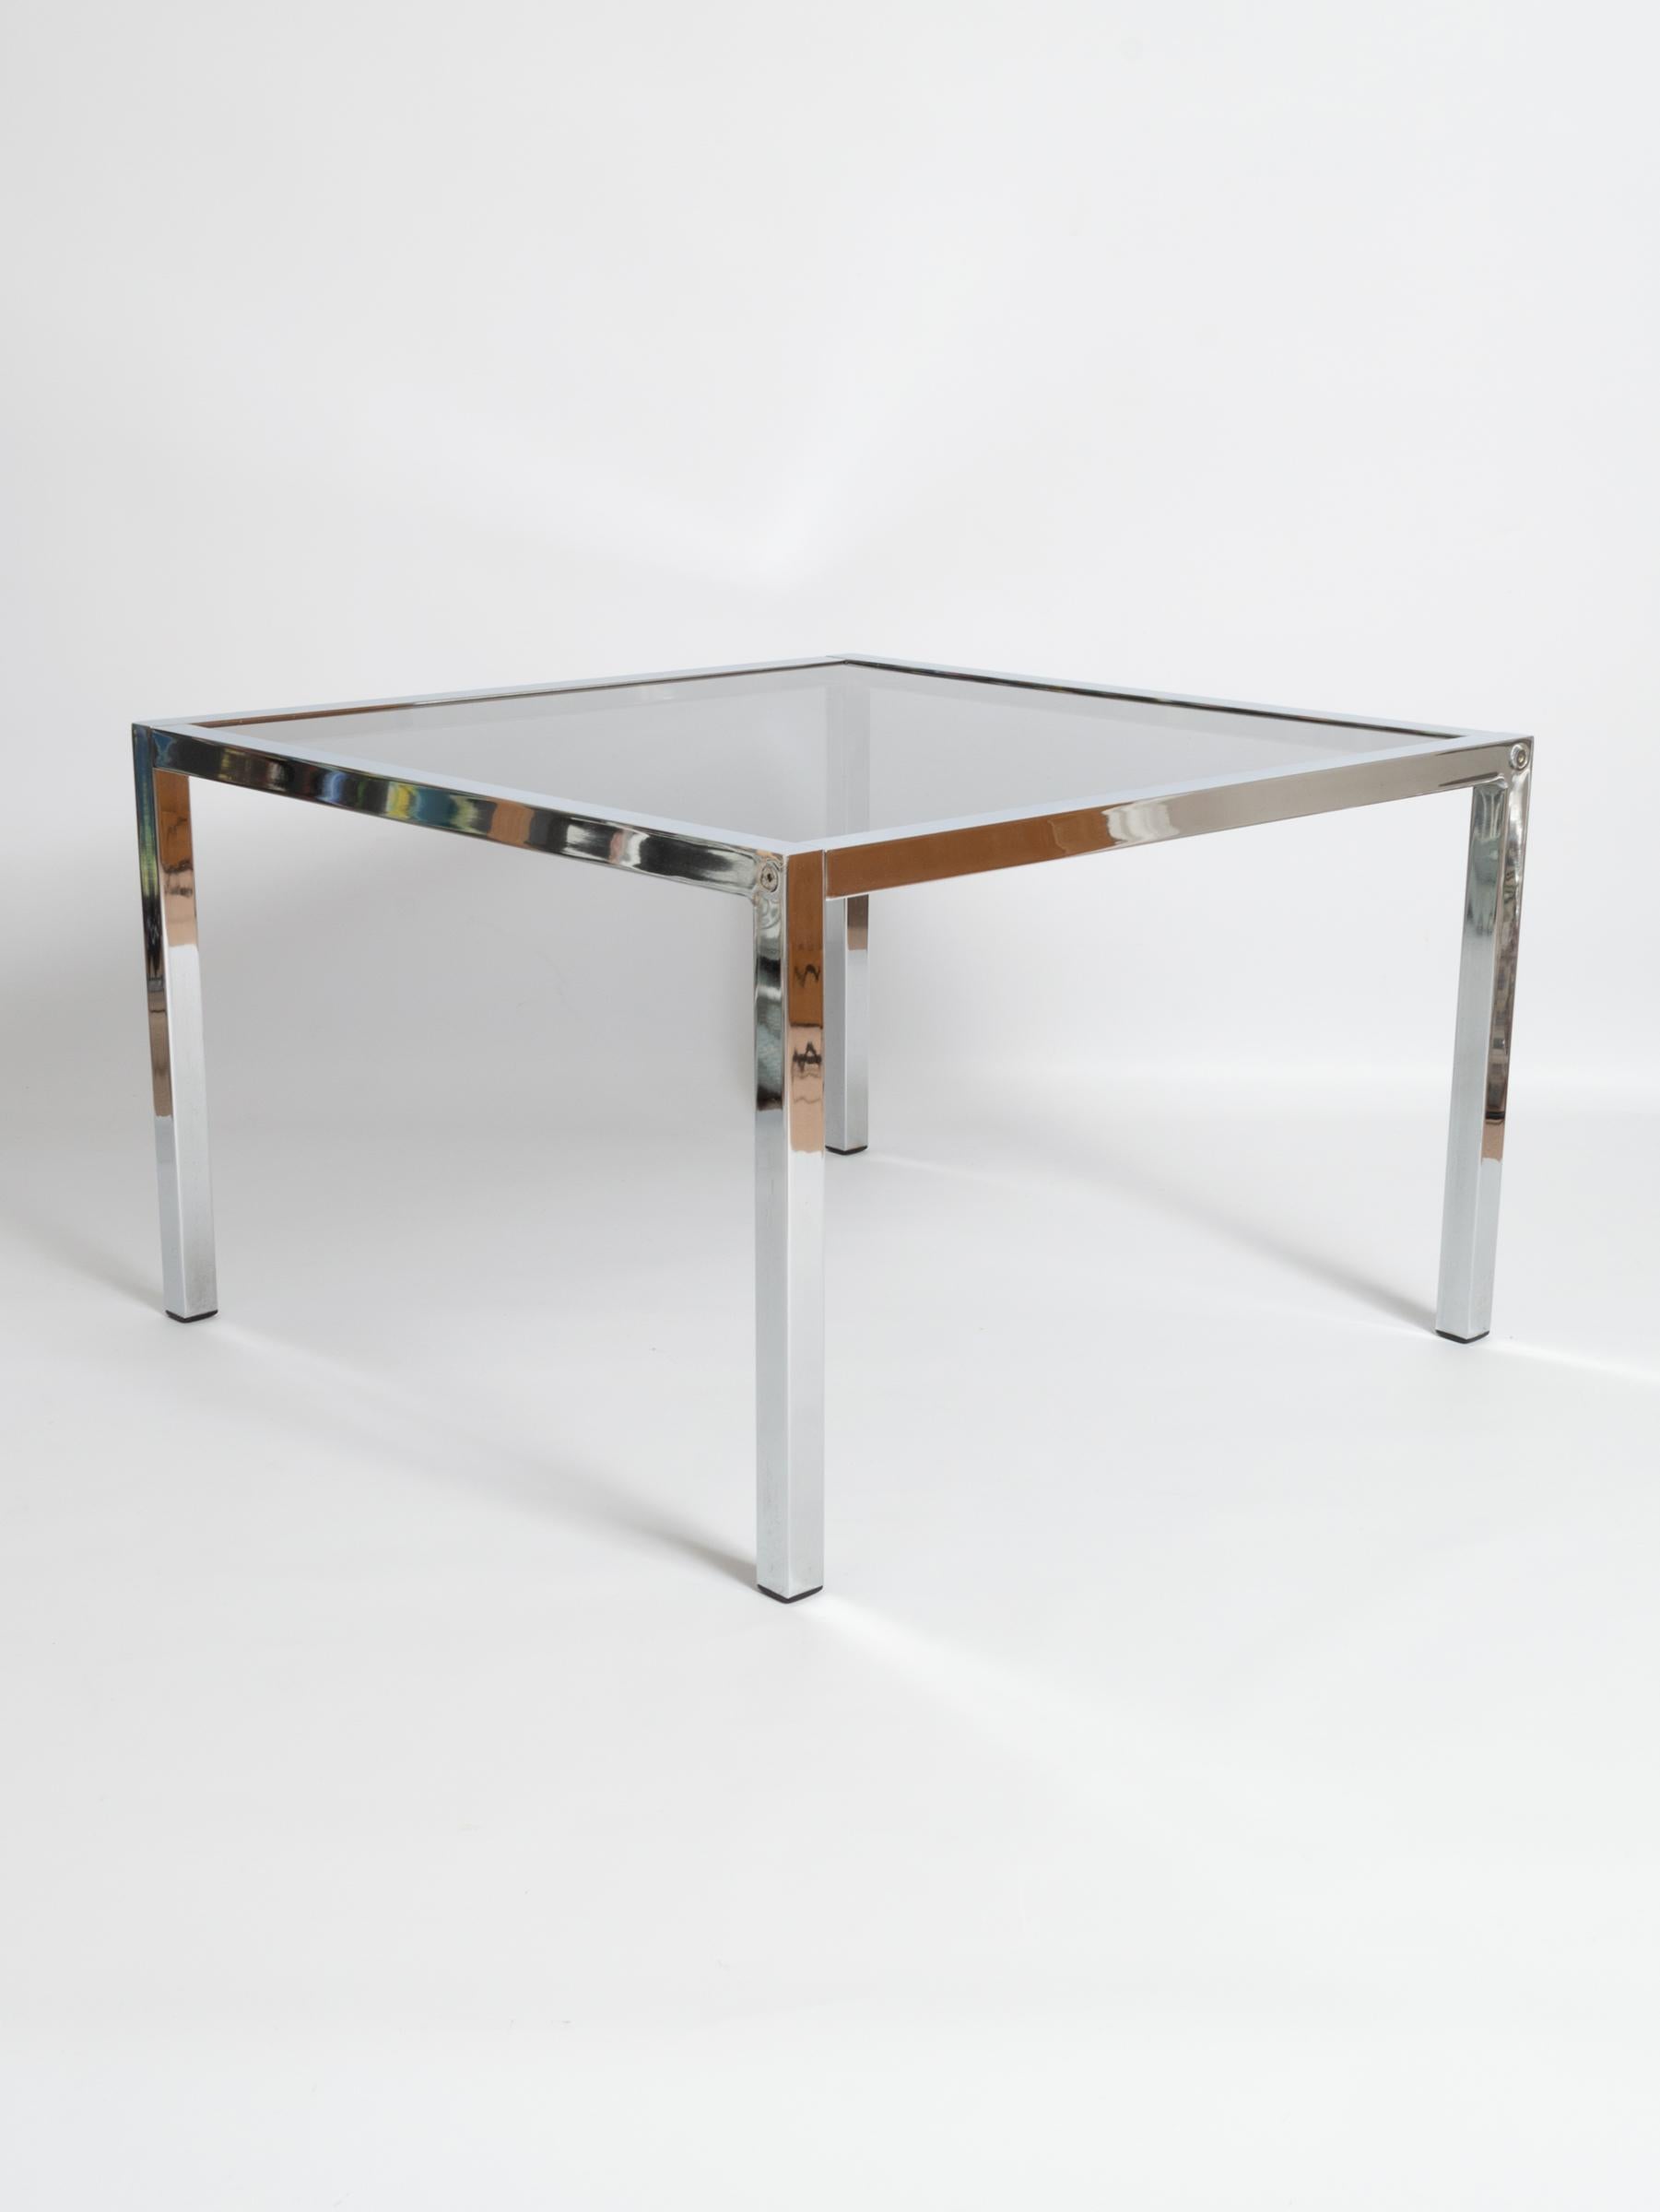 Pair of Midcentury Chrome and Smoked Glass End Side Tables, Italy, circa 1970 For Sale 2